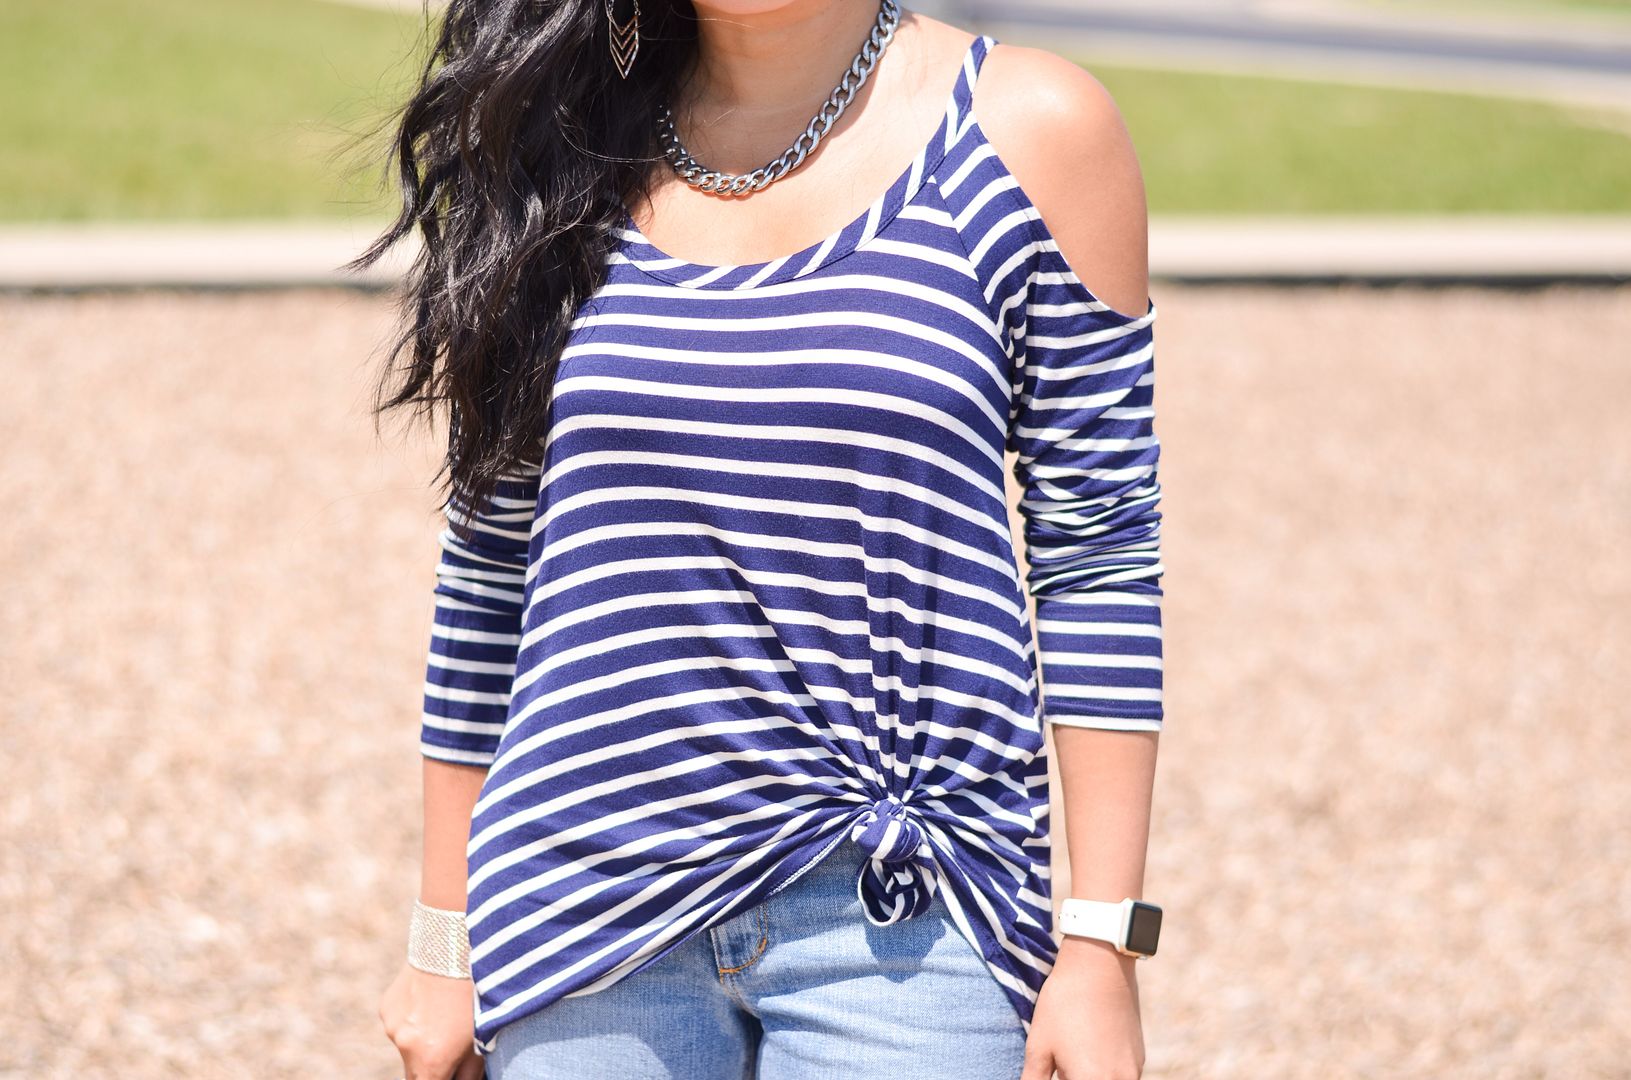 The mint julep boutique nautical notes top